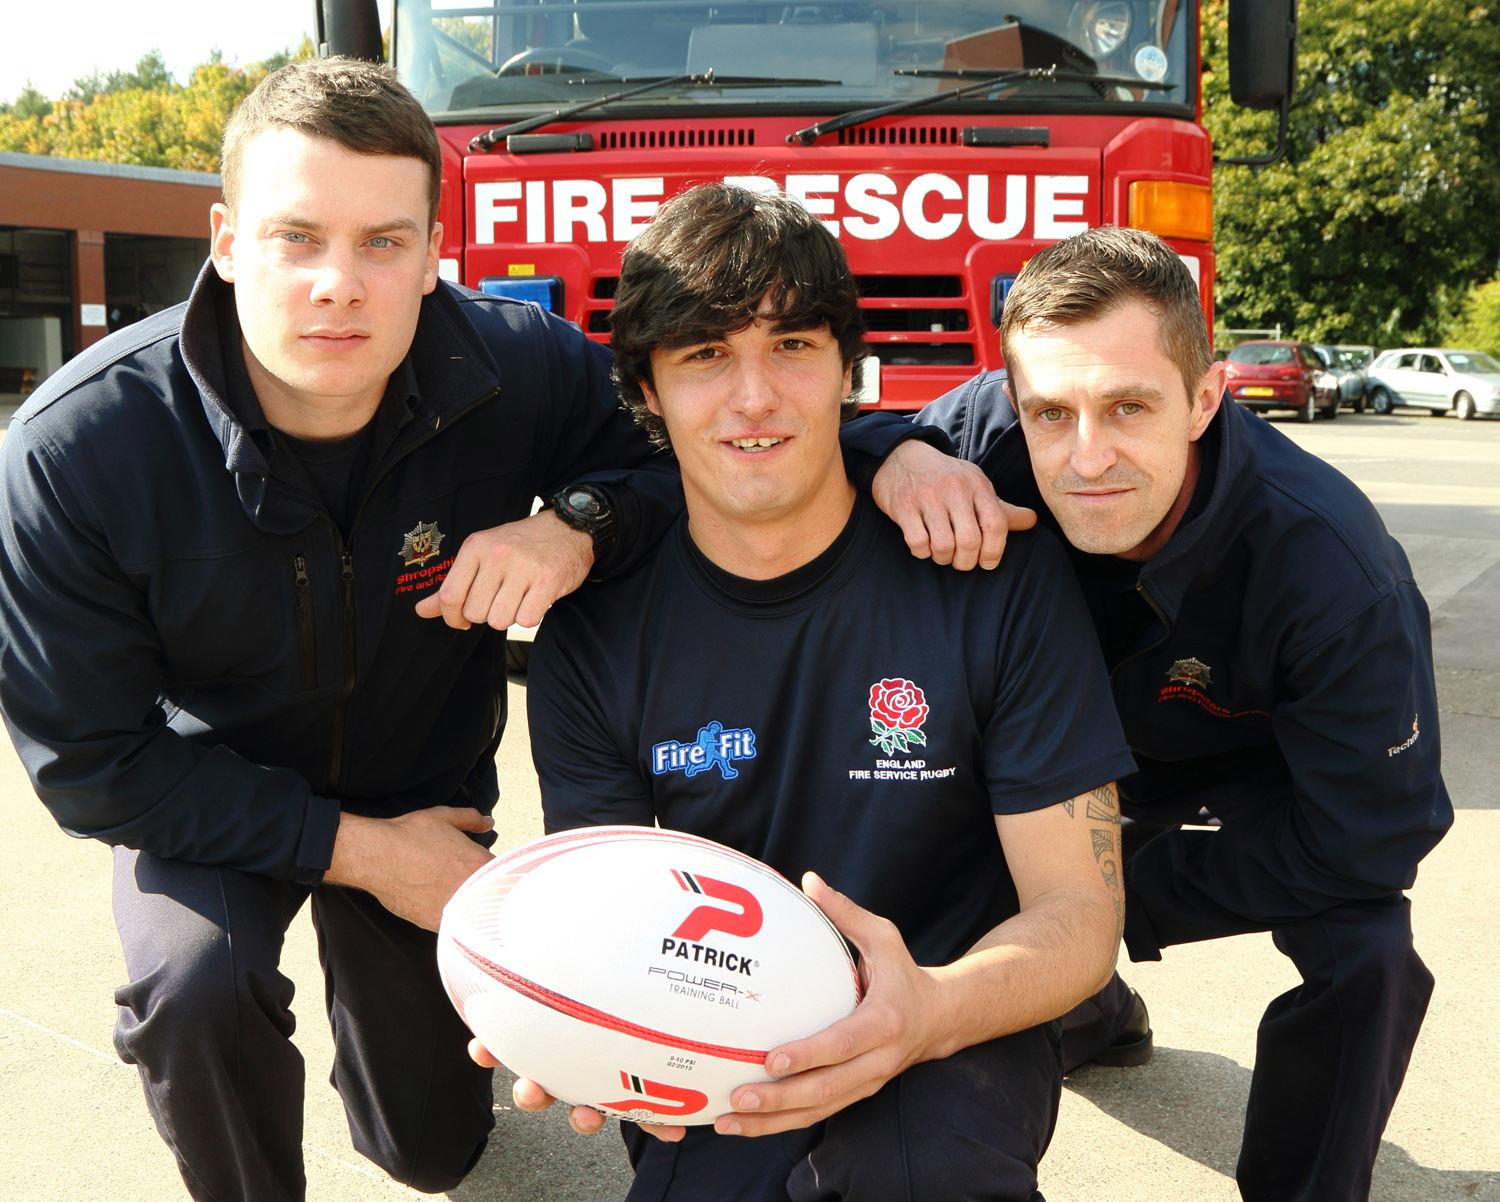 Firefighter colleagues Chris Bayliss, (left) from Ludlow, and Matt Barrow, from Baschurch, fire up George Jacks ready for his England rugby match.